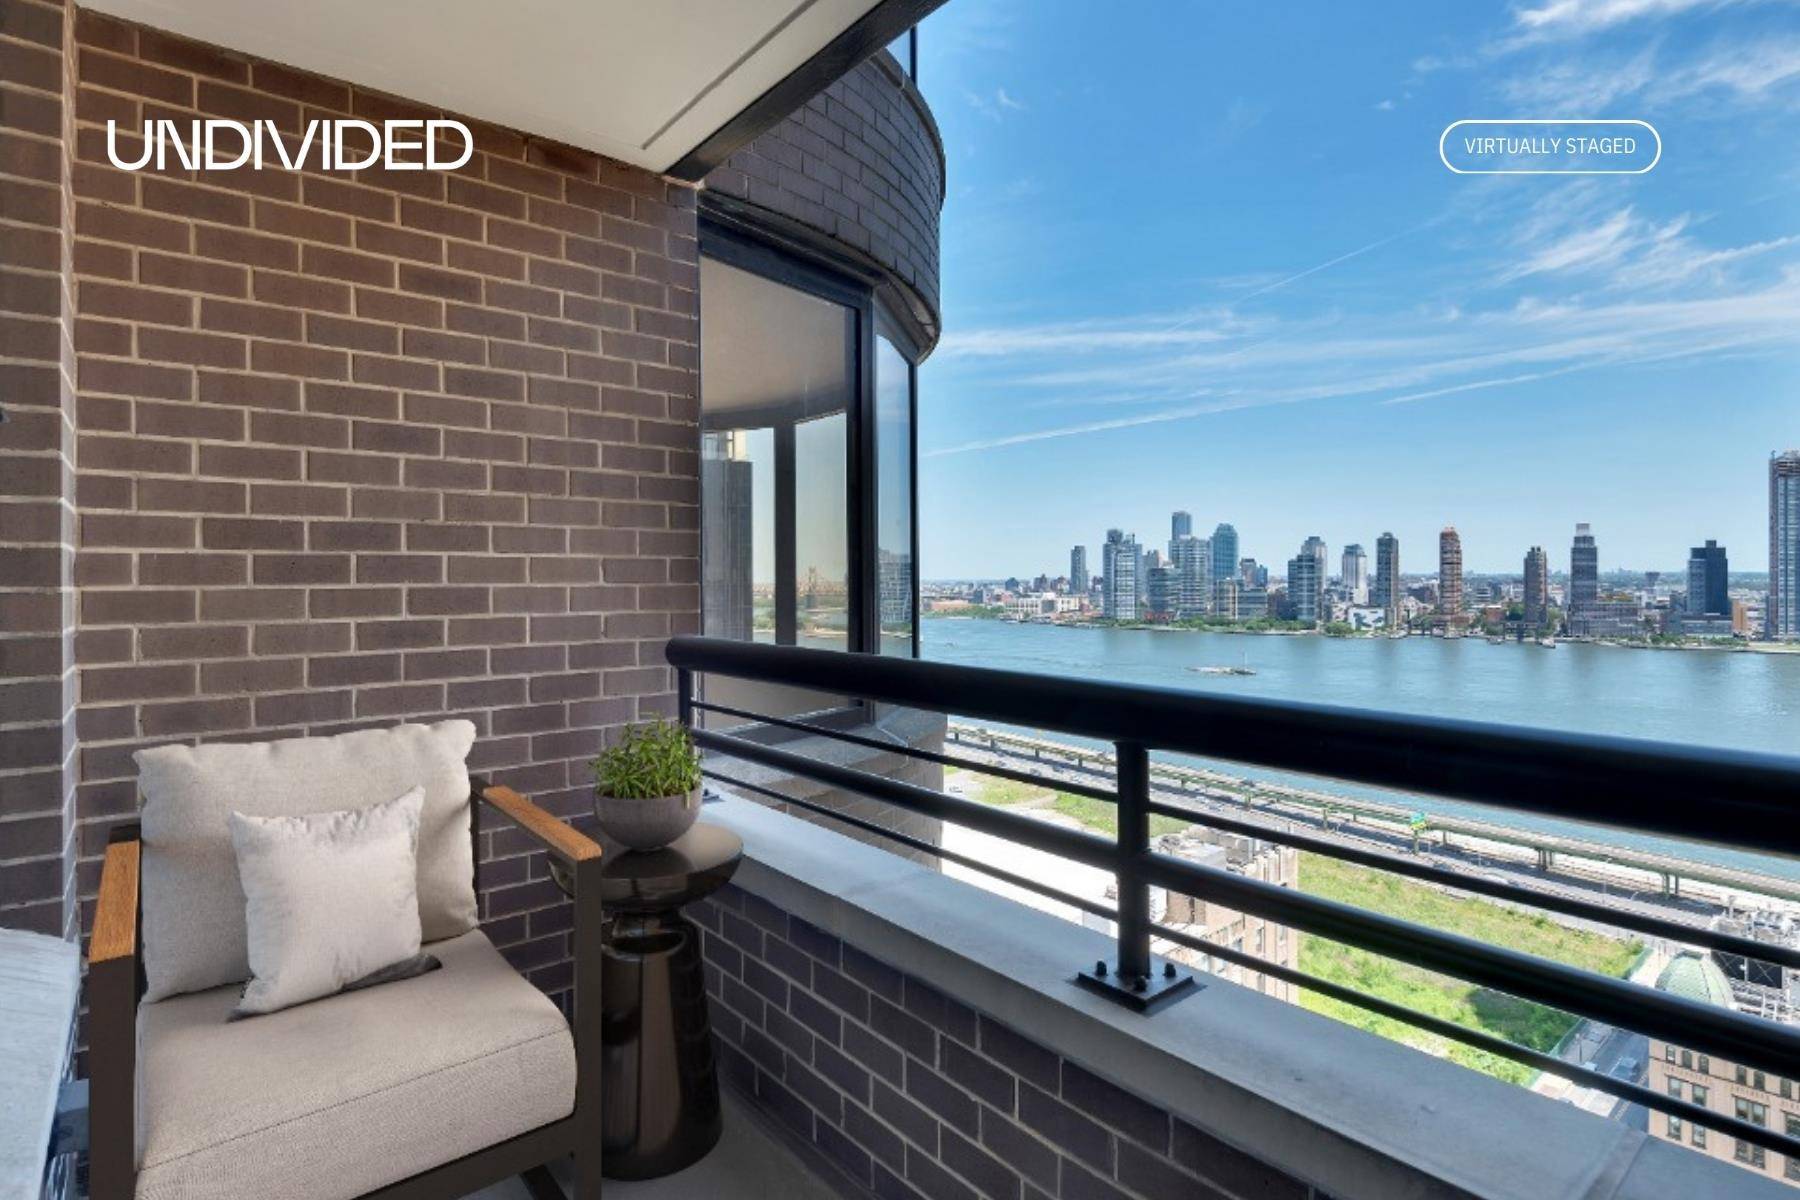 Located on the 25th floor, this extra large one bedroom boasts amazing views of the East River.